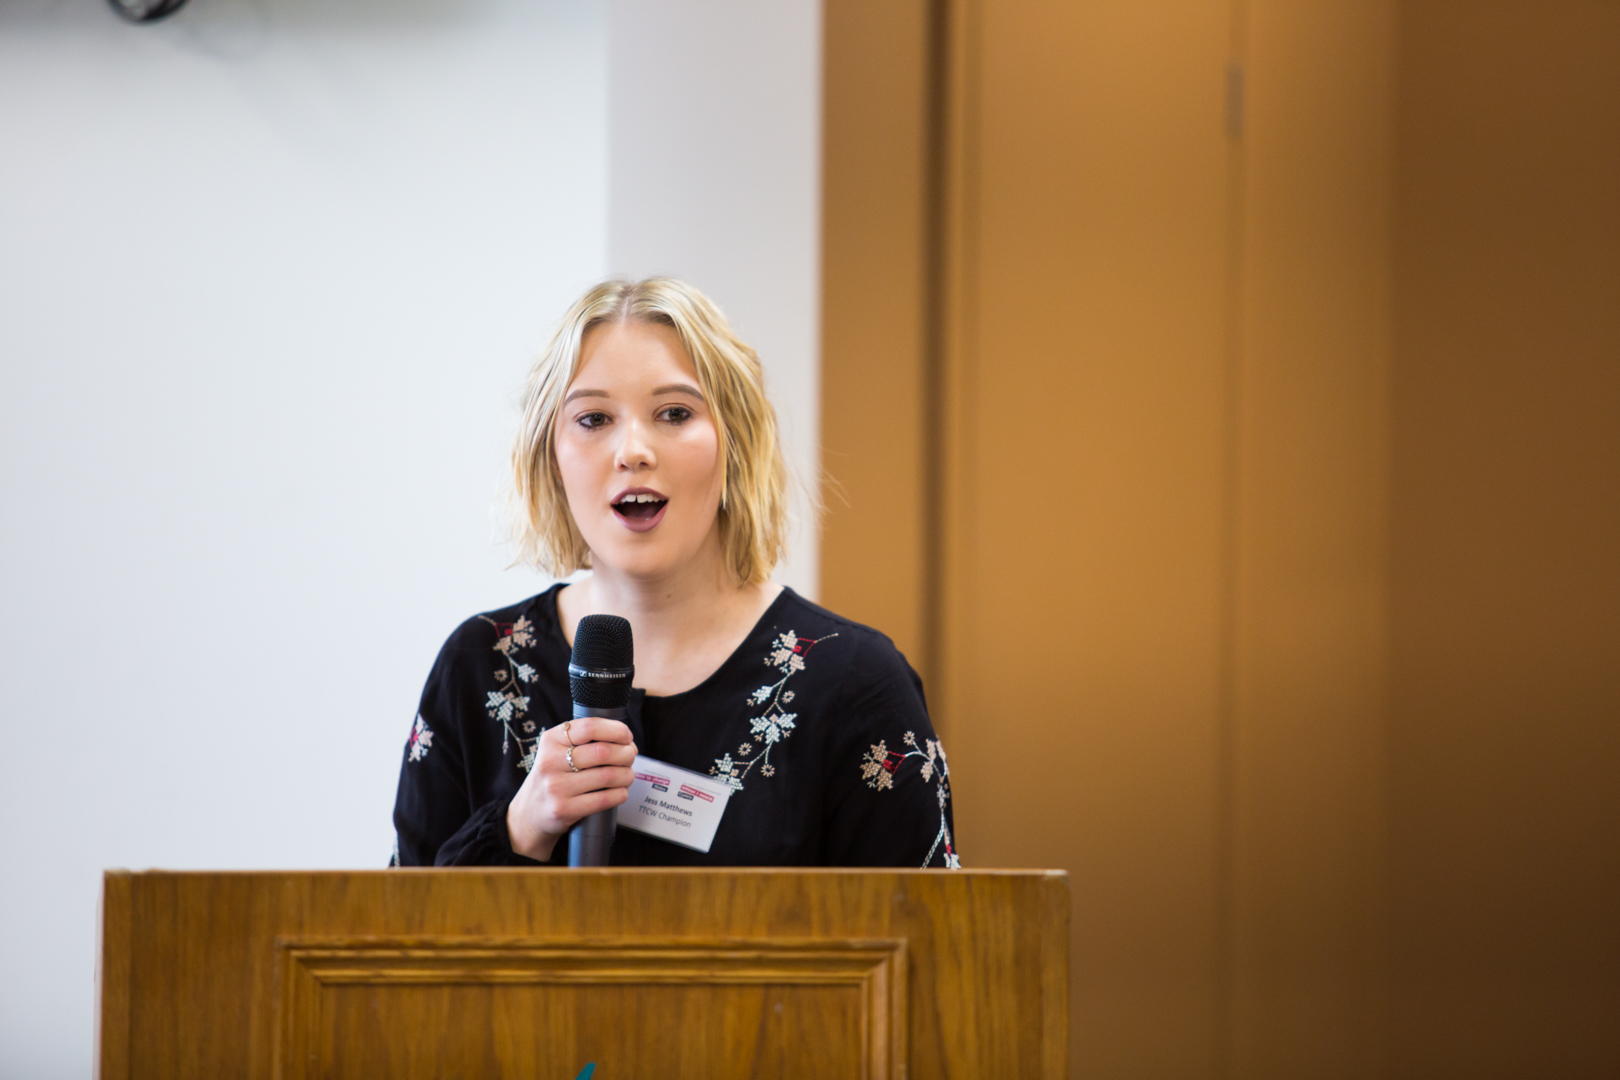 Jess speaks out about Mental Health at the Young People's Pledge Signing event in October 2018